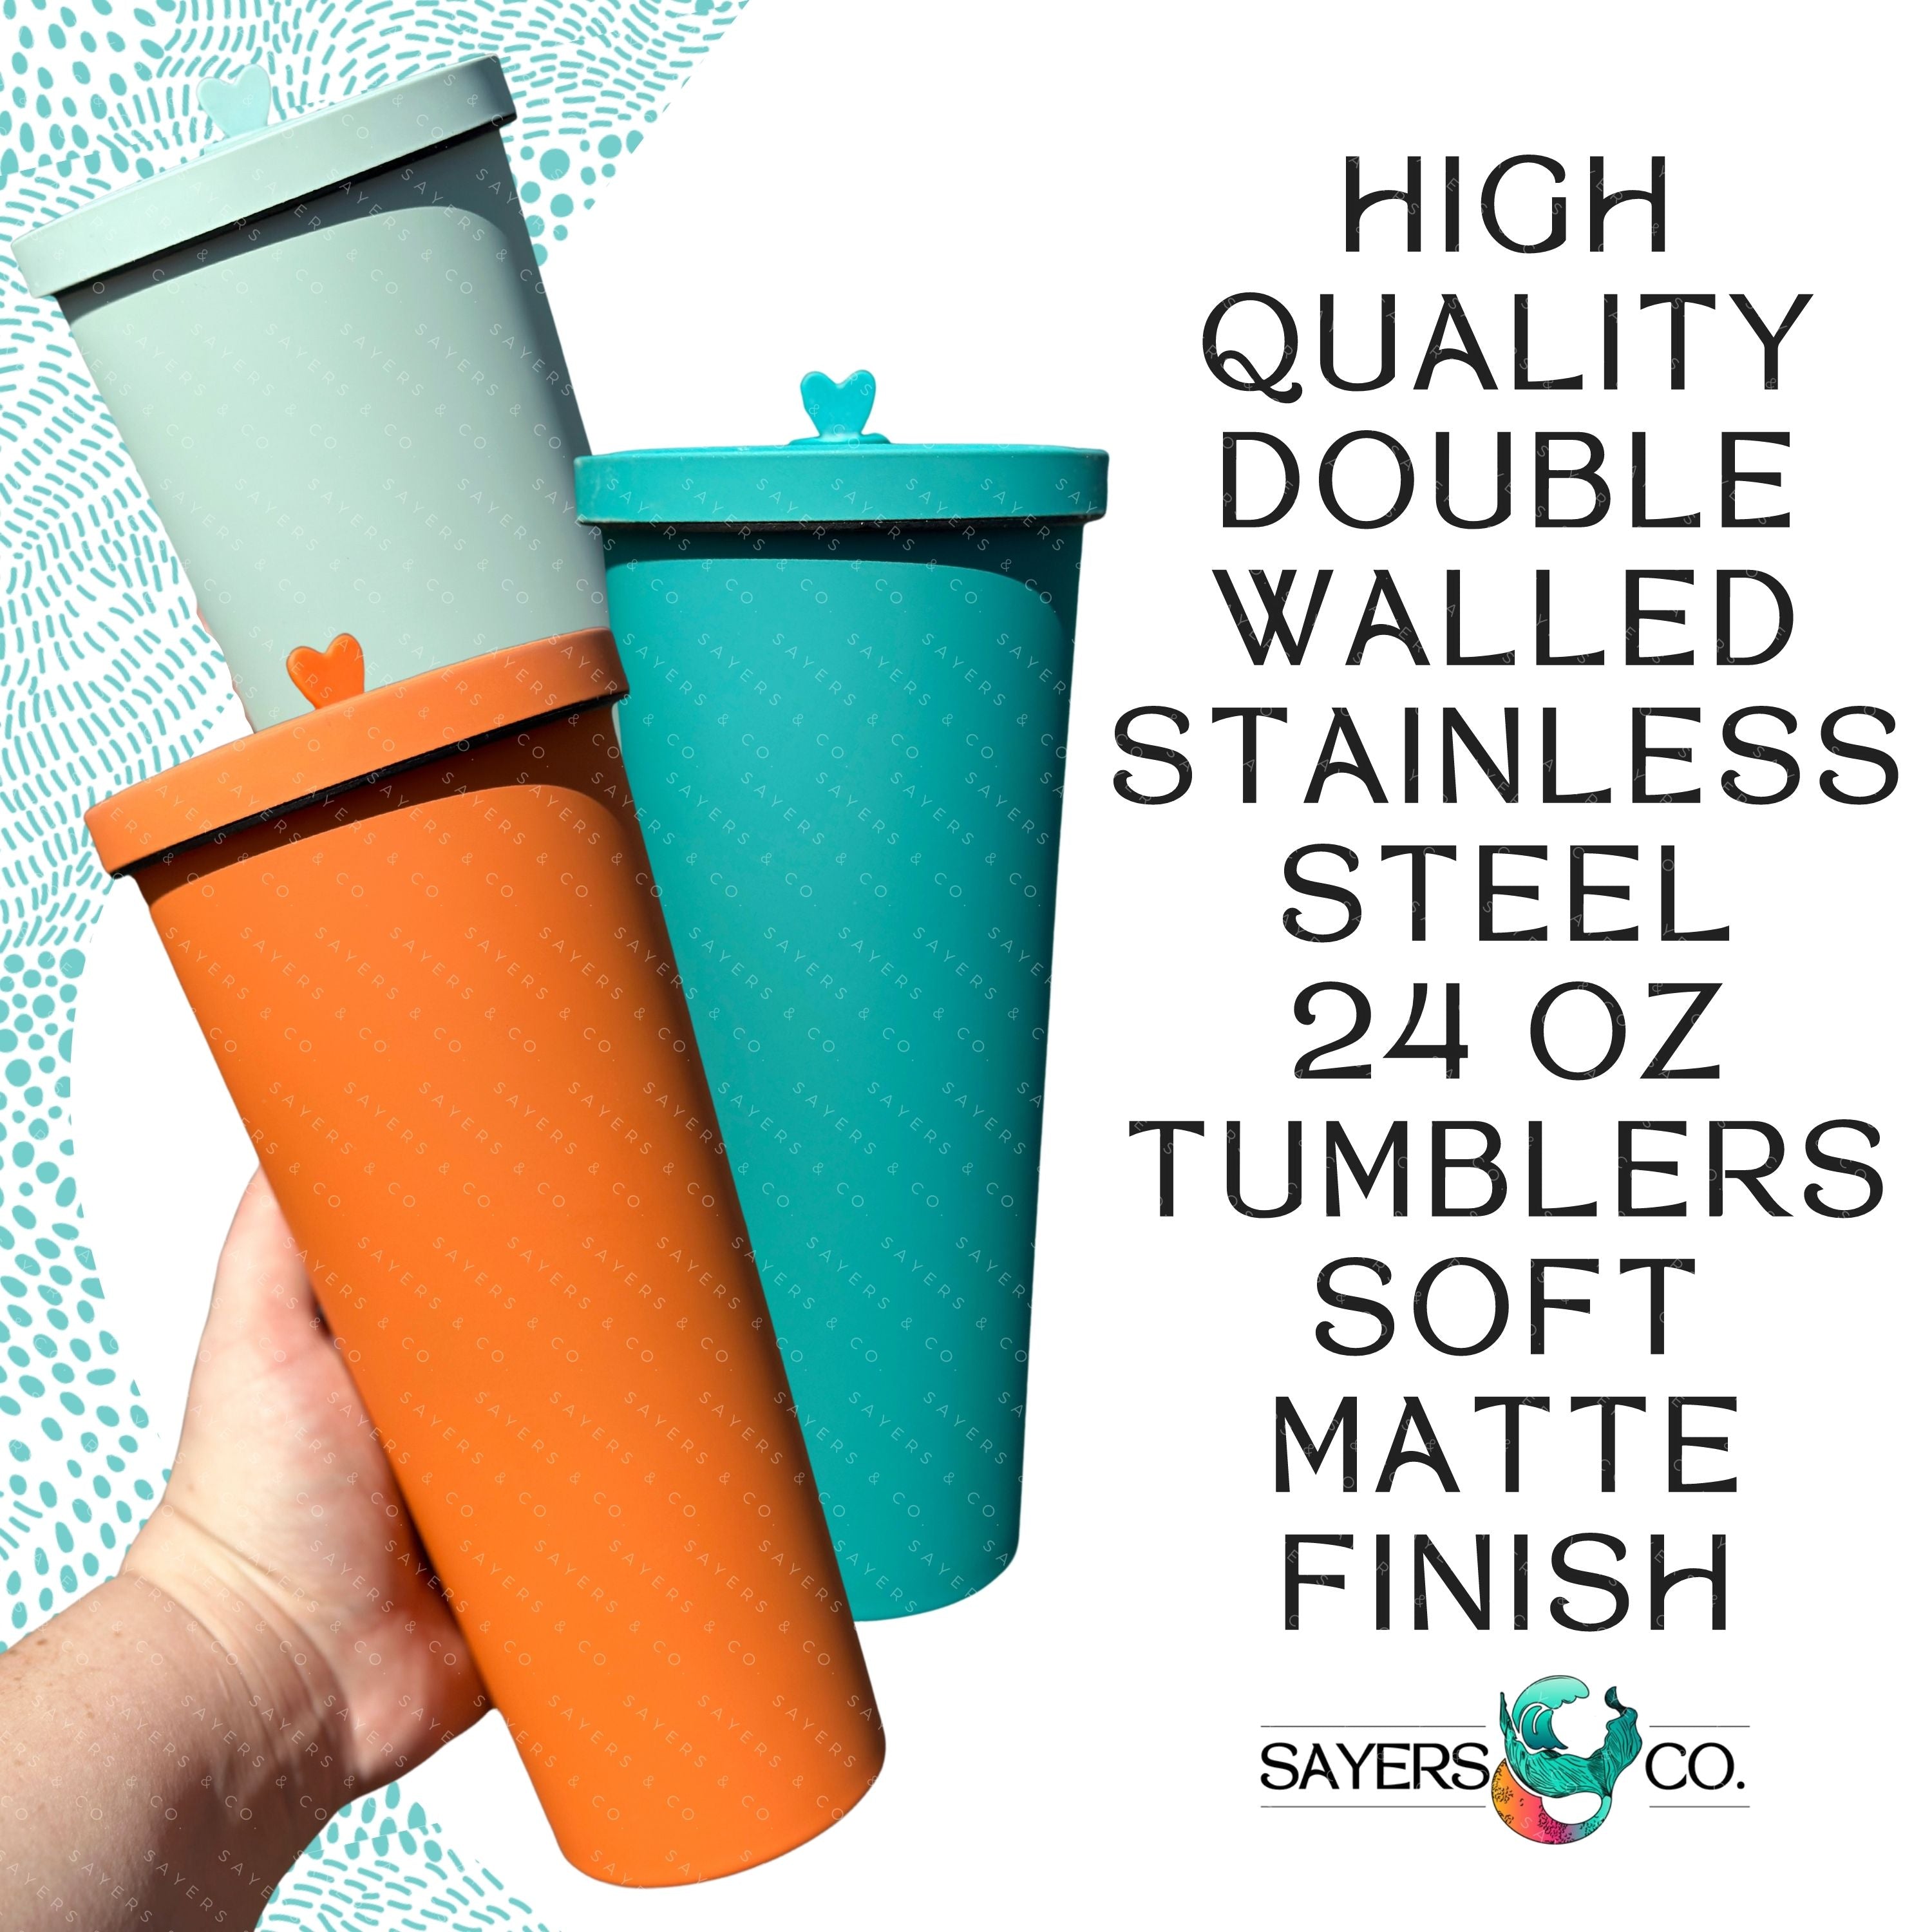 Buy Wholesale China 24oz Glass Tumbler Cups With Handle, Bamboo